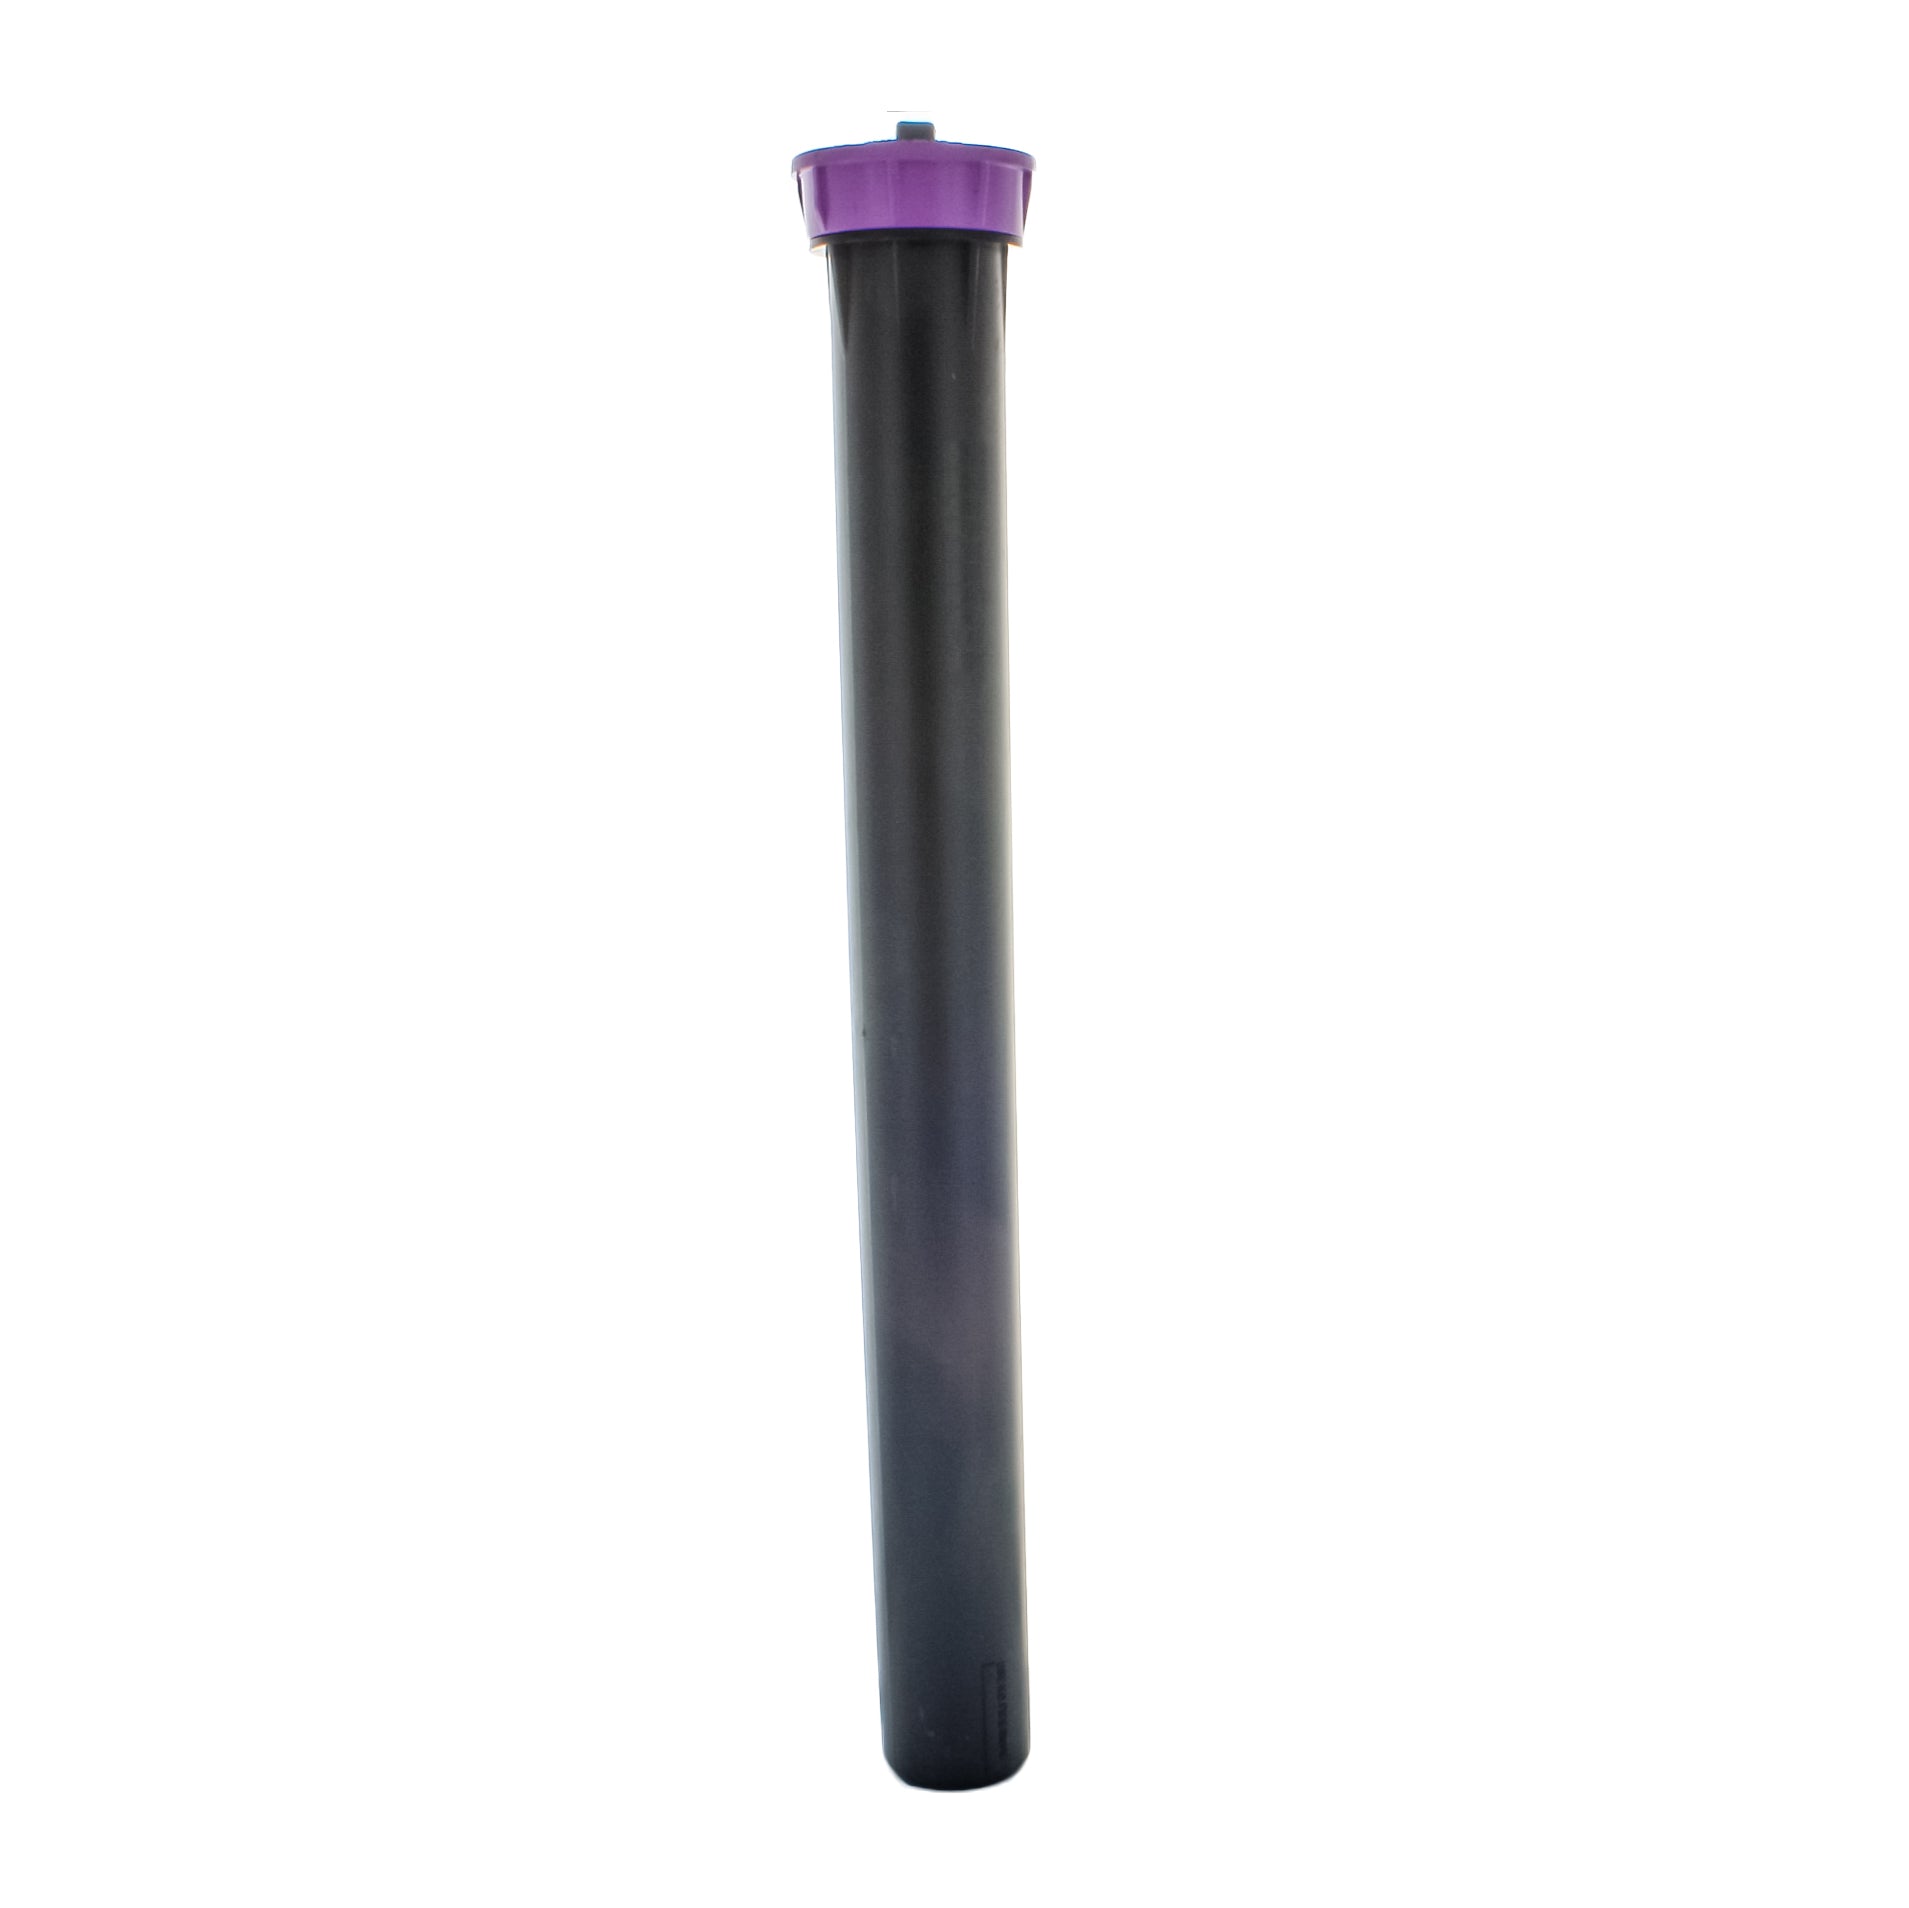 Hunter - PROS-12-PRS30-CV-R - 30 PSI Regulated 12 in. Pop-up Spray; with Check Valve & Reclaimed Water ID logo cap (Purple)